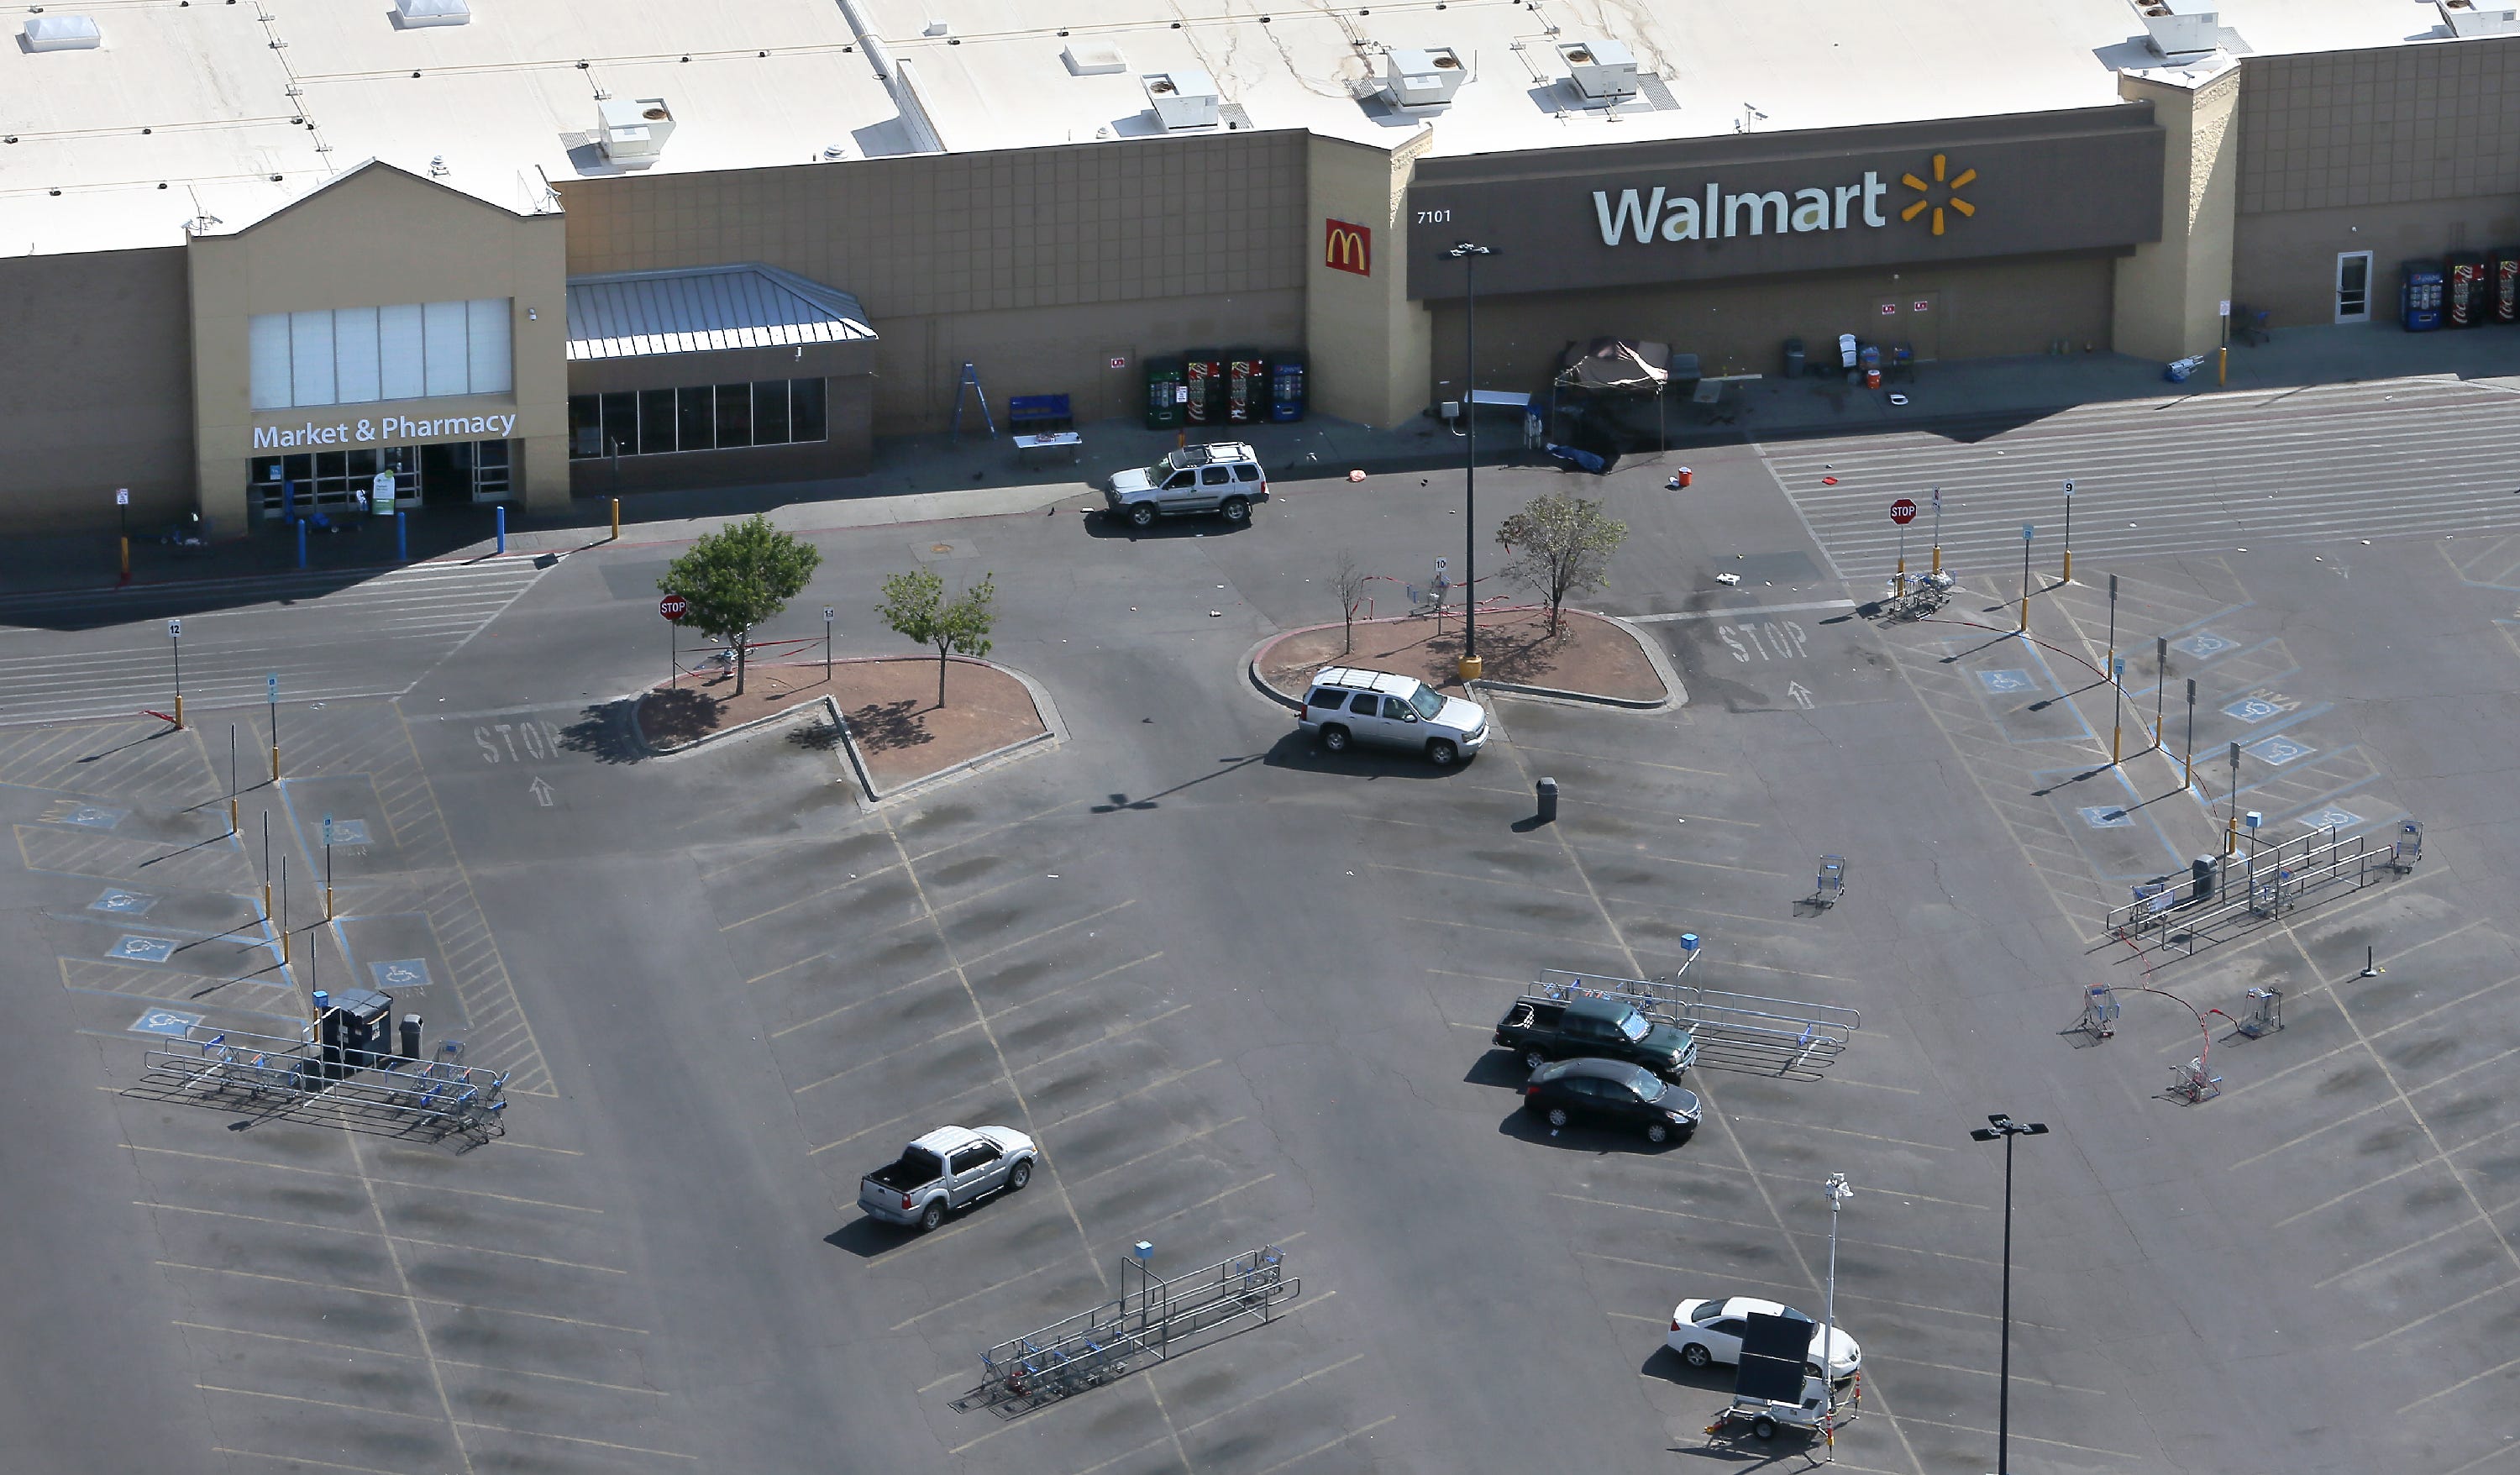 Aerial photographs of Walmart near Cielo Vista Mall where a shooting that killed 22 and wounded 25 others happened Saturday, Aug. 3, 2019. Some vehicles still remain at the crime scene. The gunman walked from the middle of the parking lot straight up the middle lane, right, shooting a man at the cart return, right center, he then proceeded to fire at the location directly under the Walmart sign, where the EP Fusion youth soccer team was holding a fundraiser. He then walked to the entrance at left and opened fire inside the building.